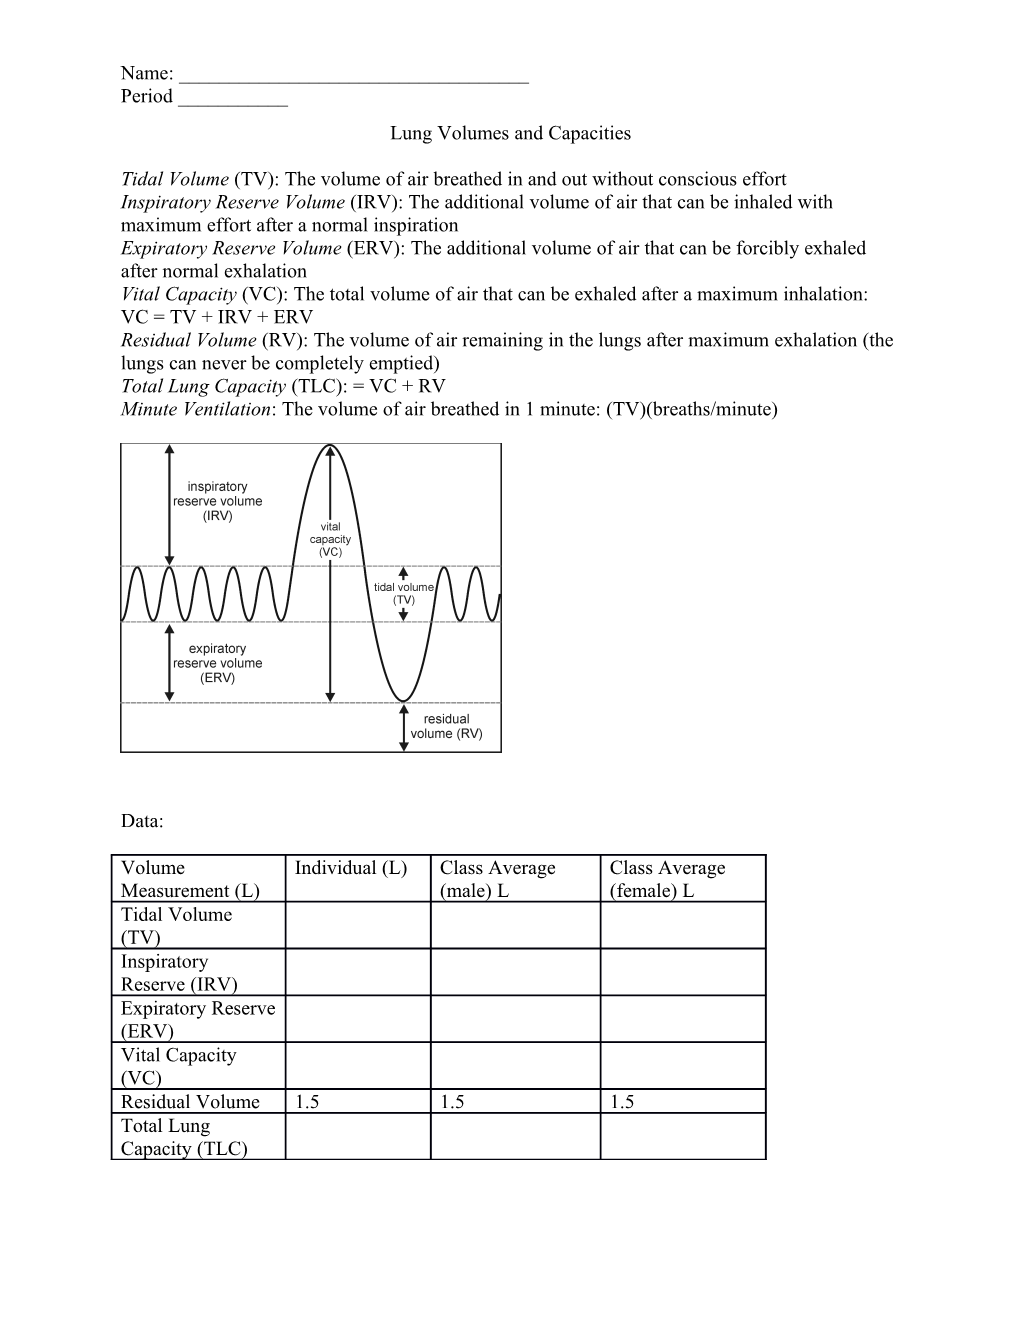 Lung Volumes and Capacities s1